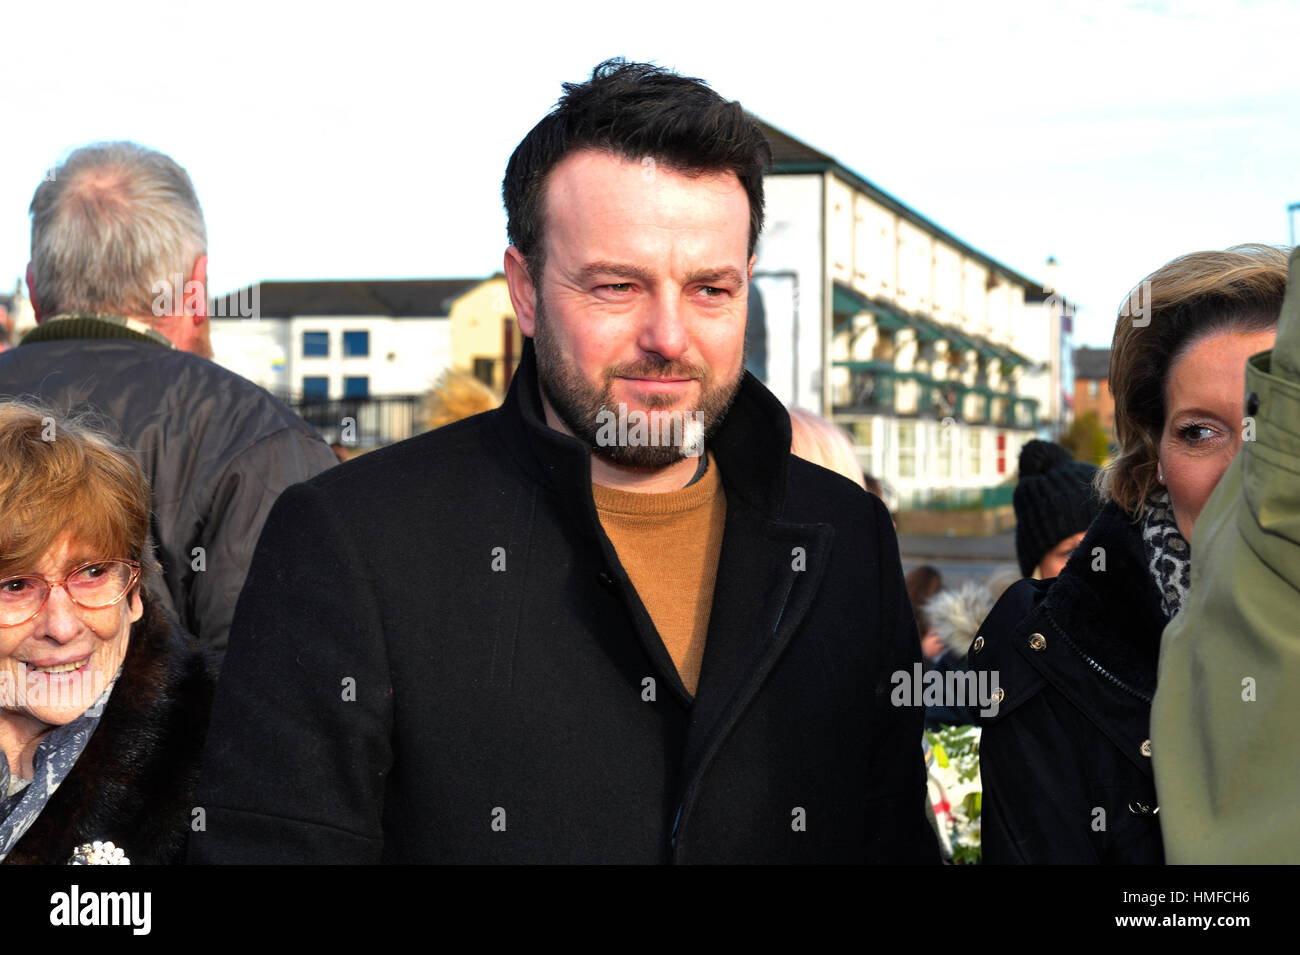 SDLP leader Colum Eastwood attending the 45th Bloody Sunday memorial service in Derry, Londonderry. Stock Photo